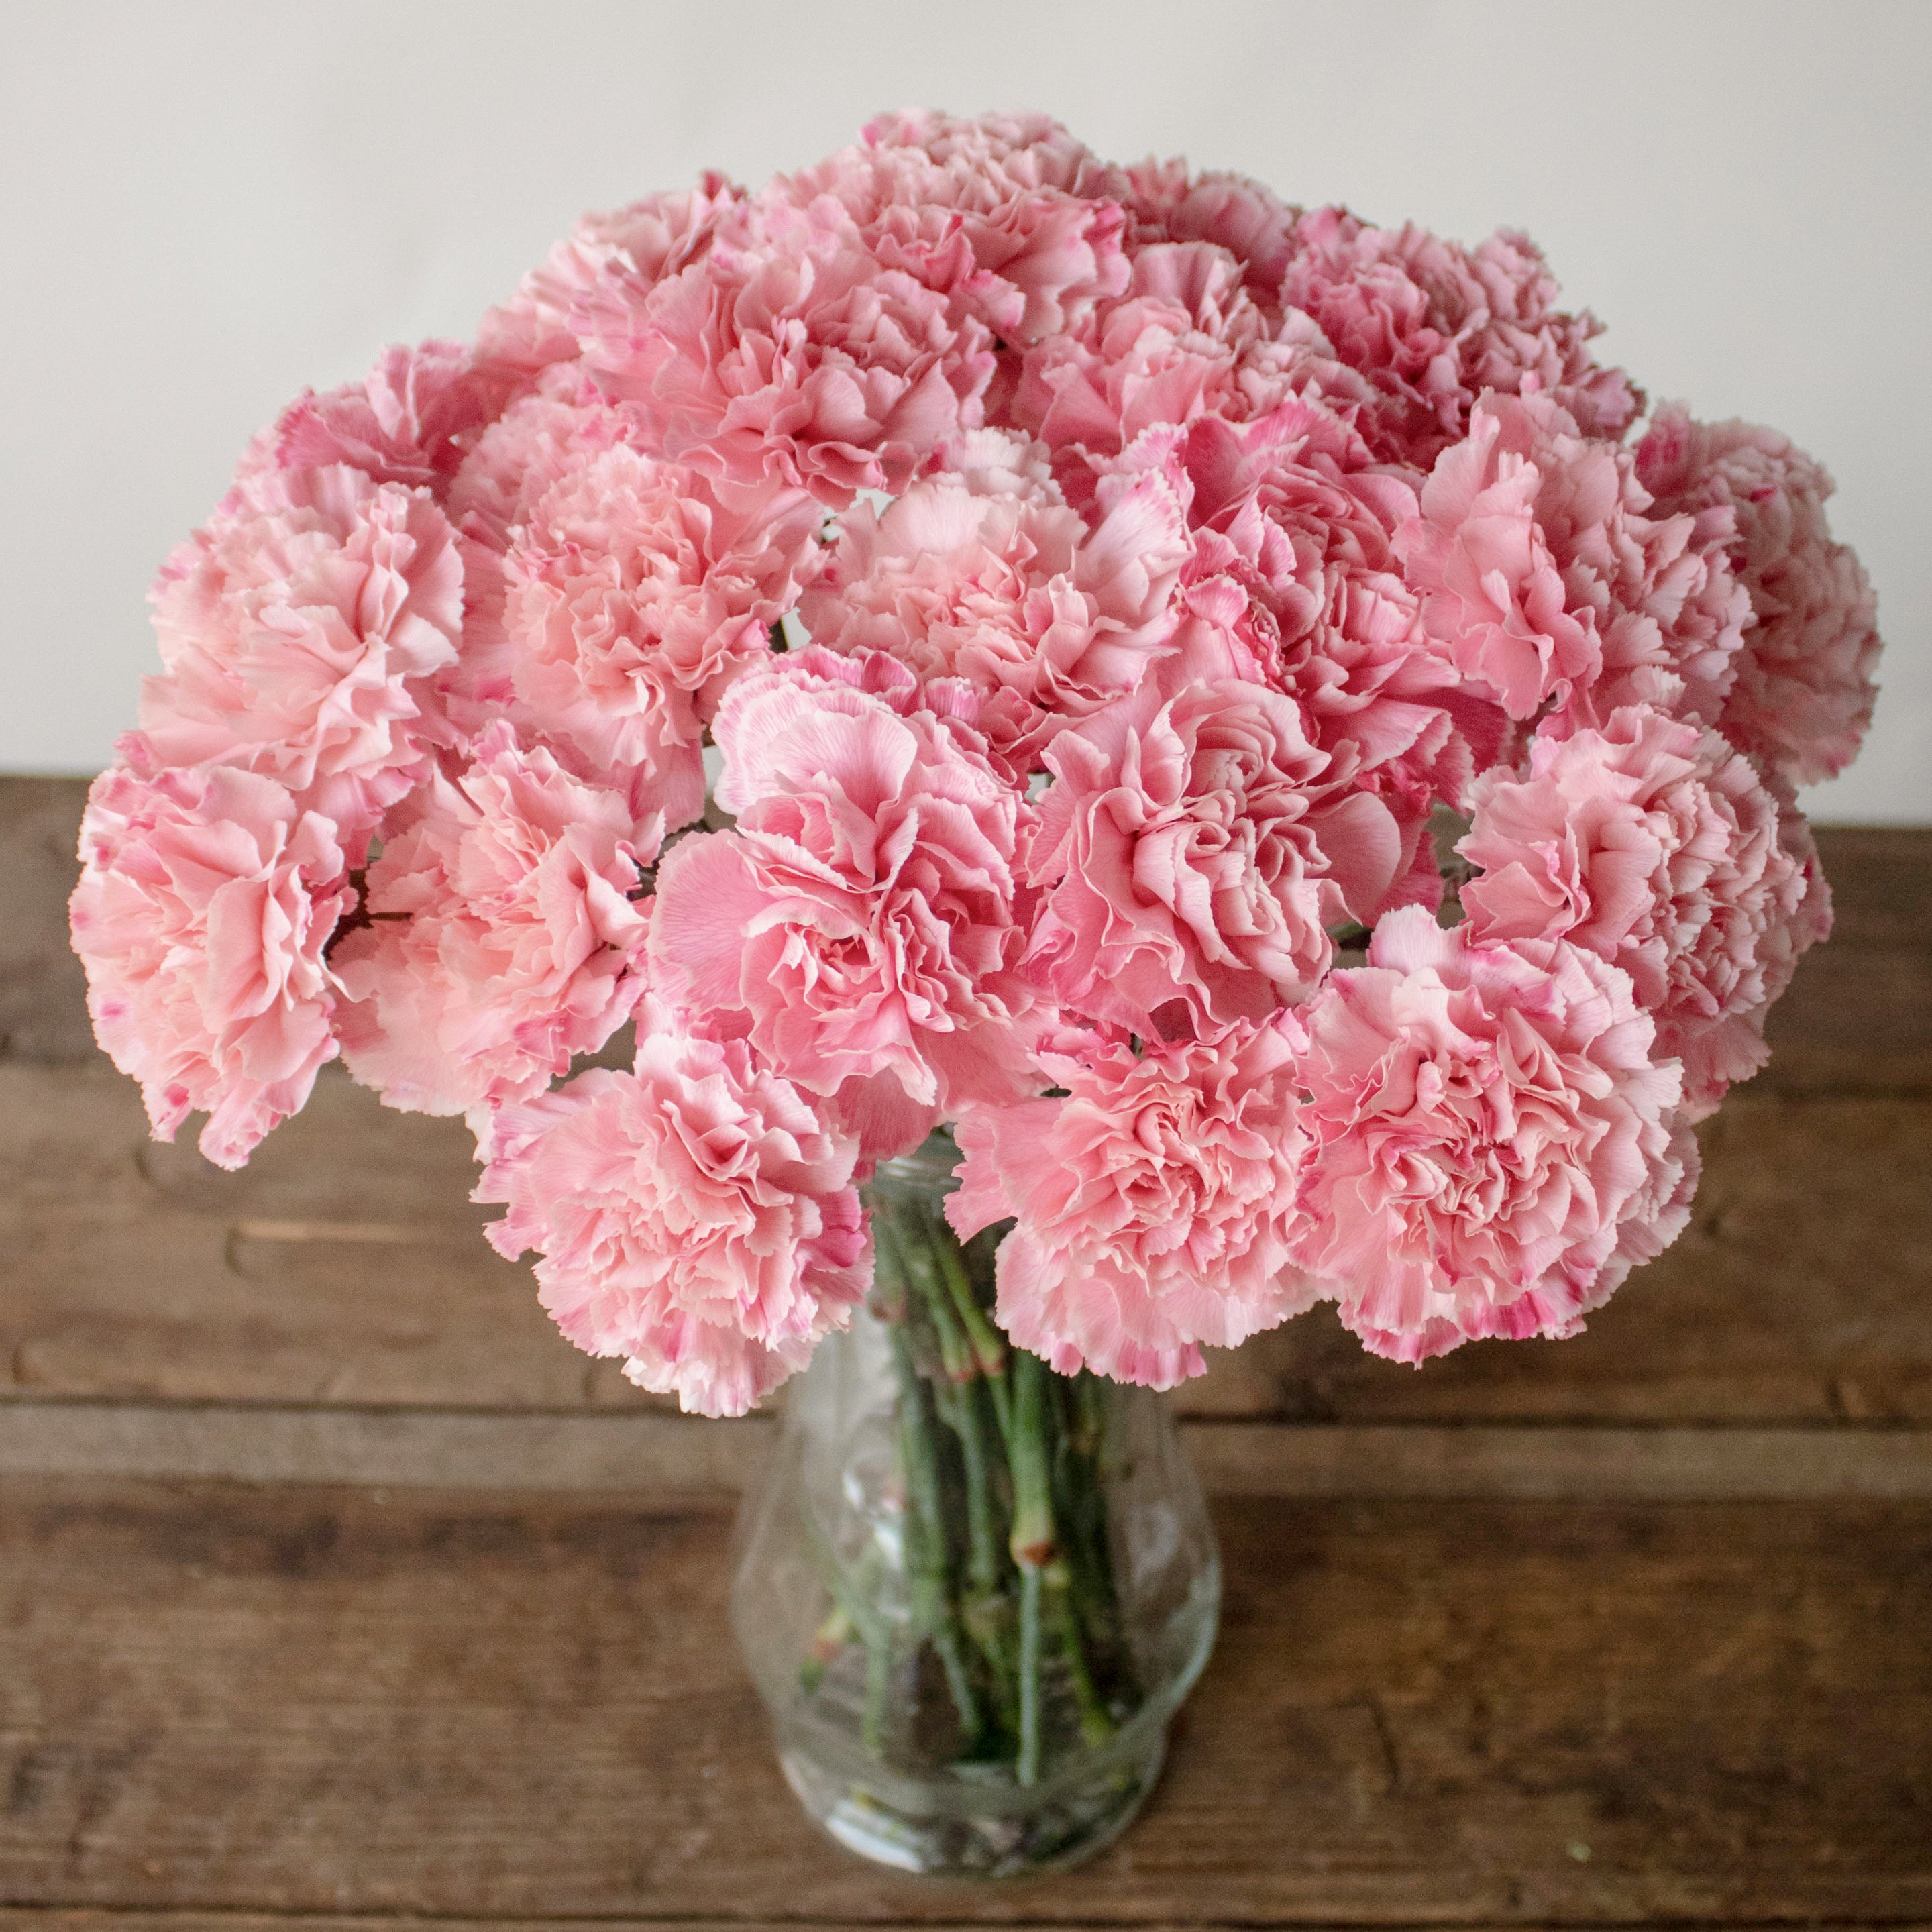 light pink carnation in a clear vase on a wooden table